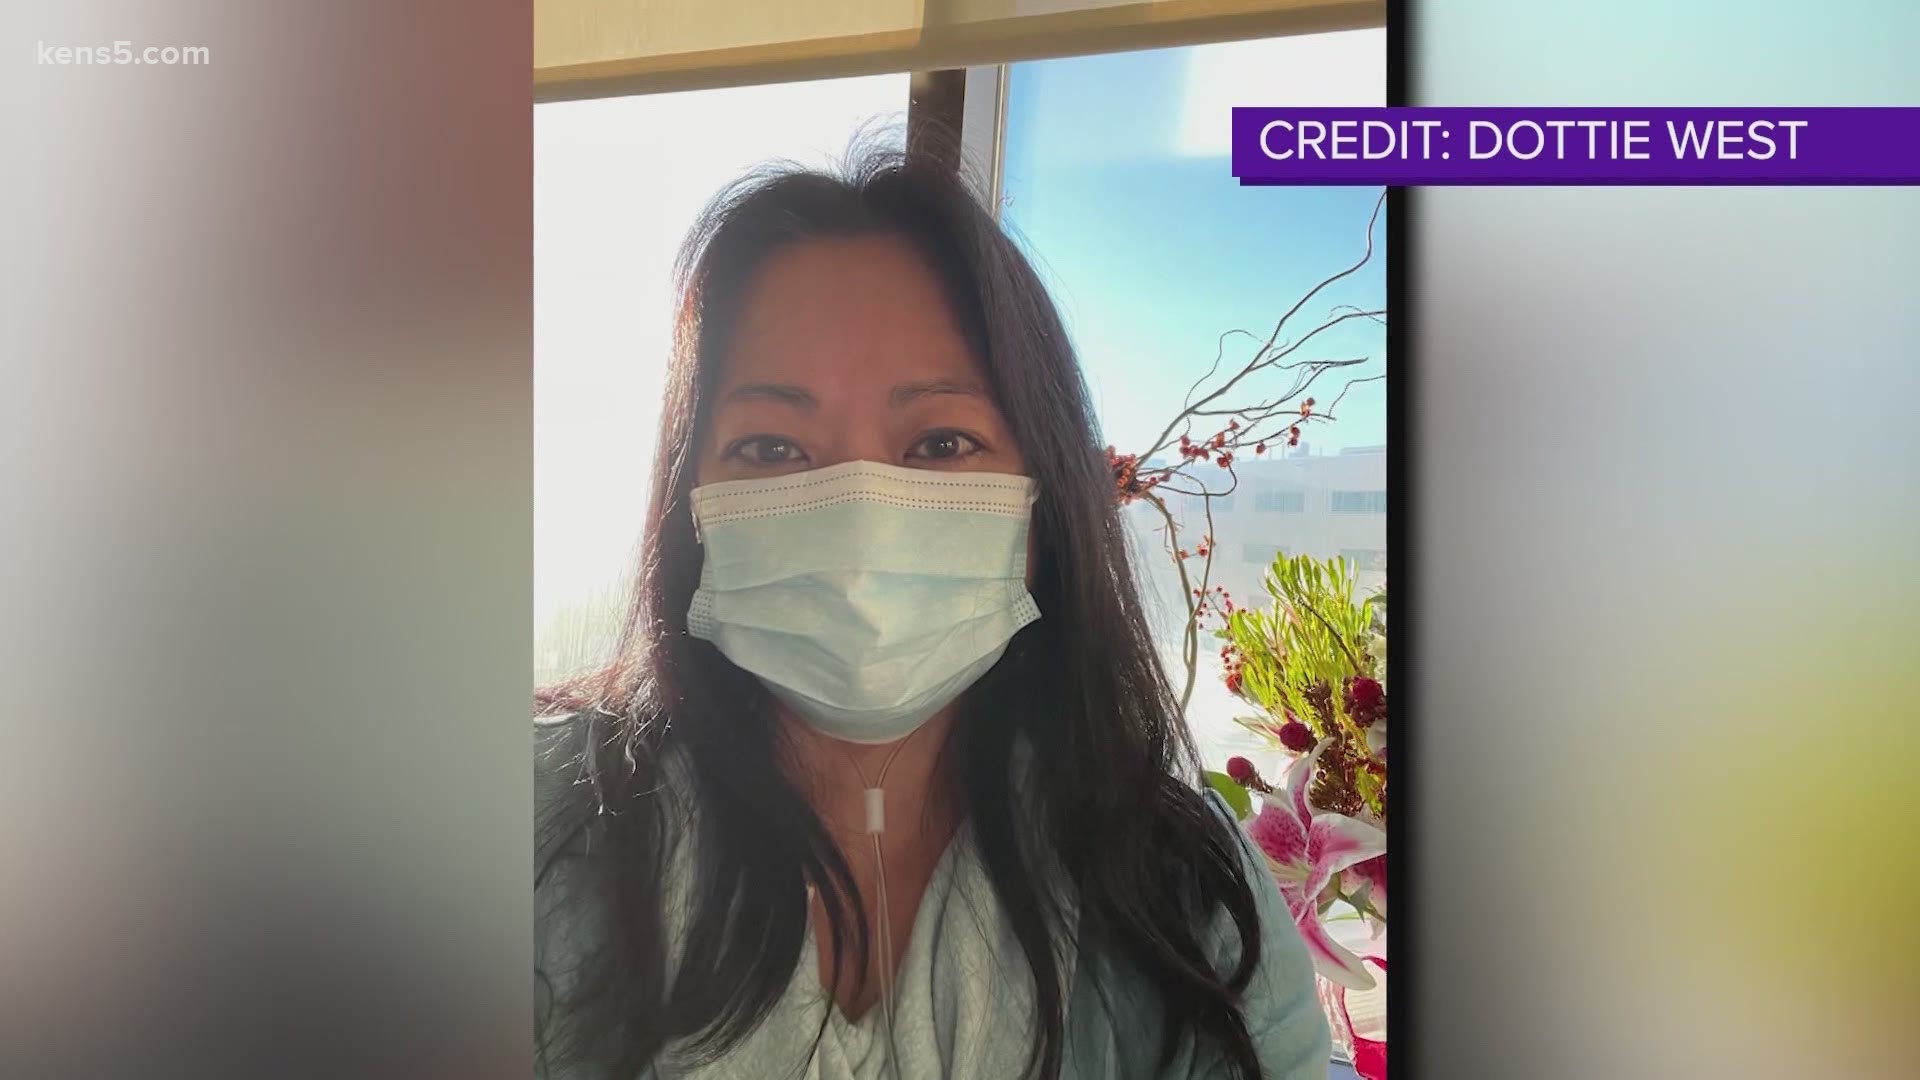 A nurse practitioner conquered the coronavirus but the virus wasn’t done with her. A reinfection landed her in a hospital.